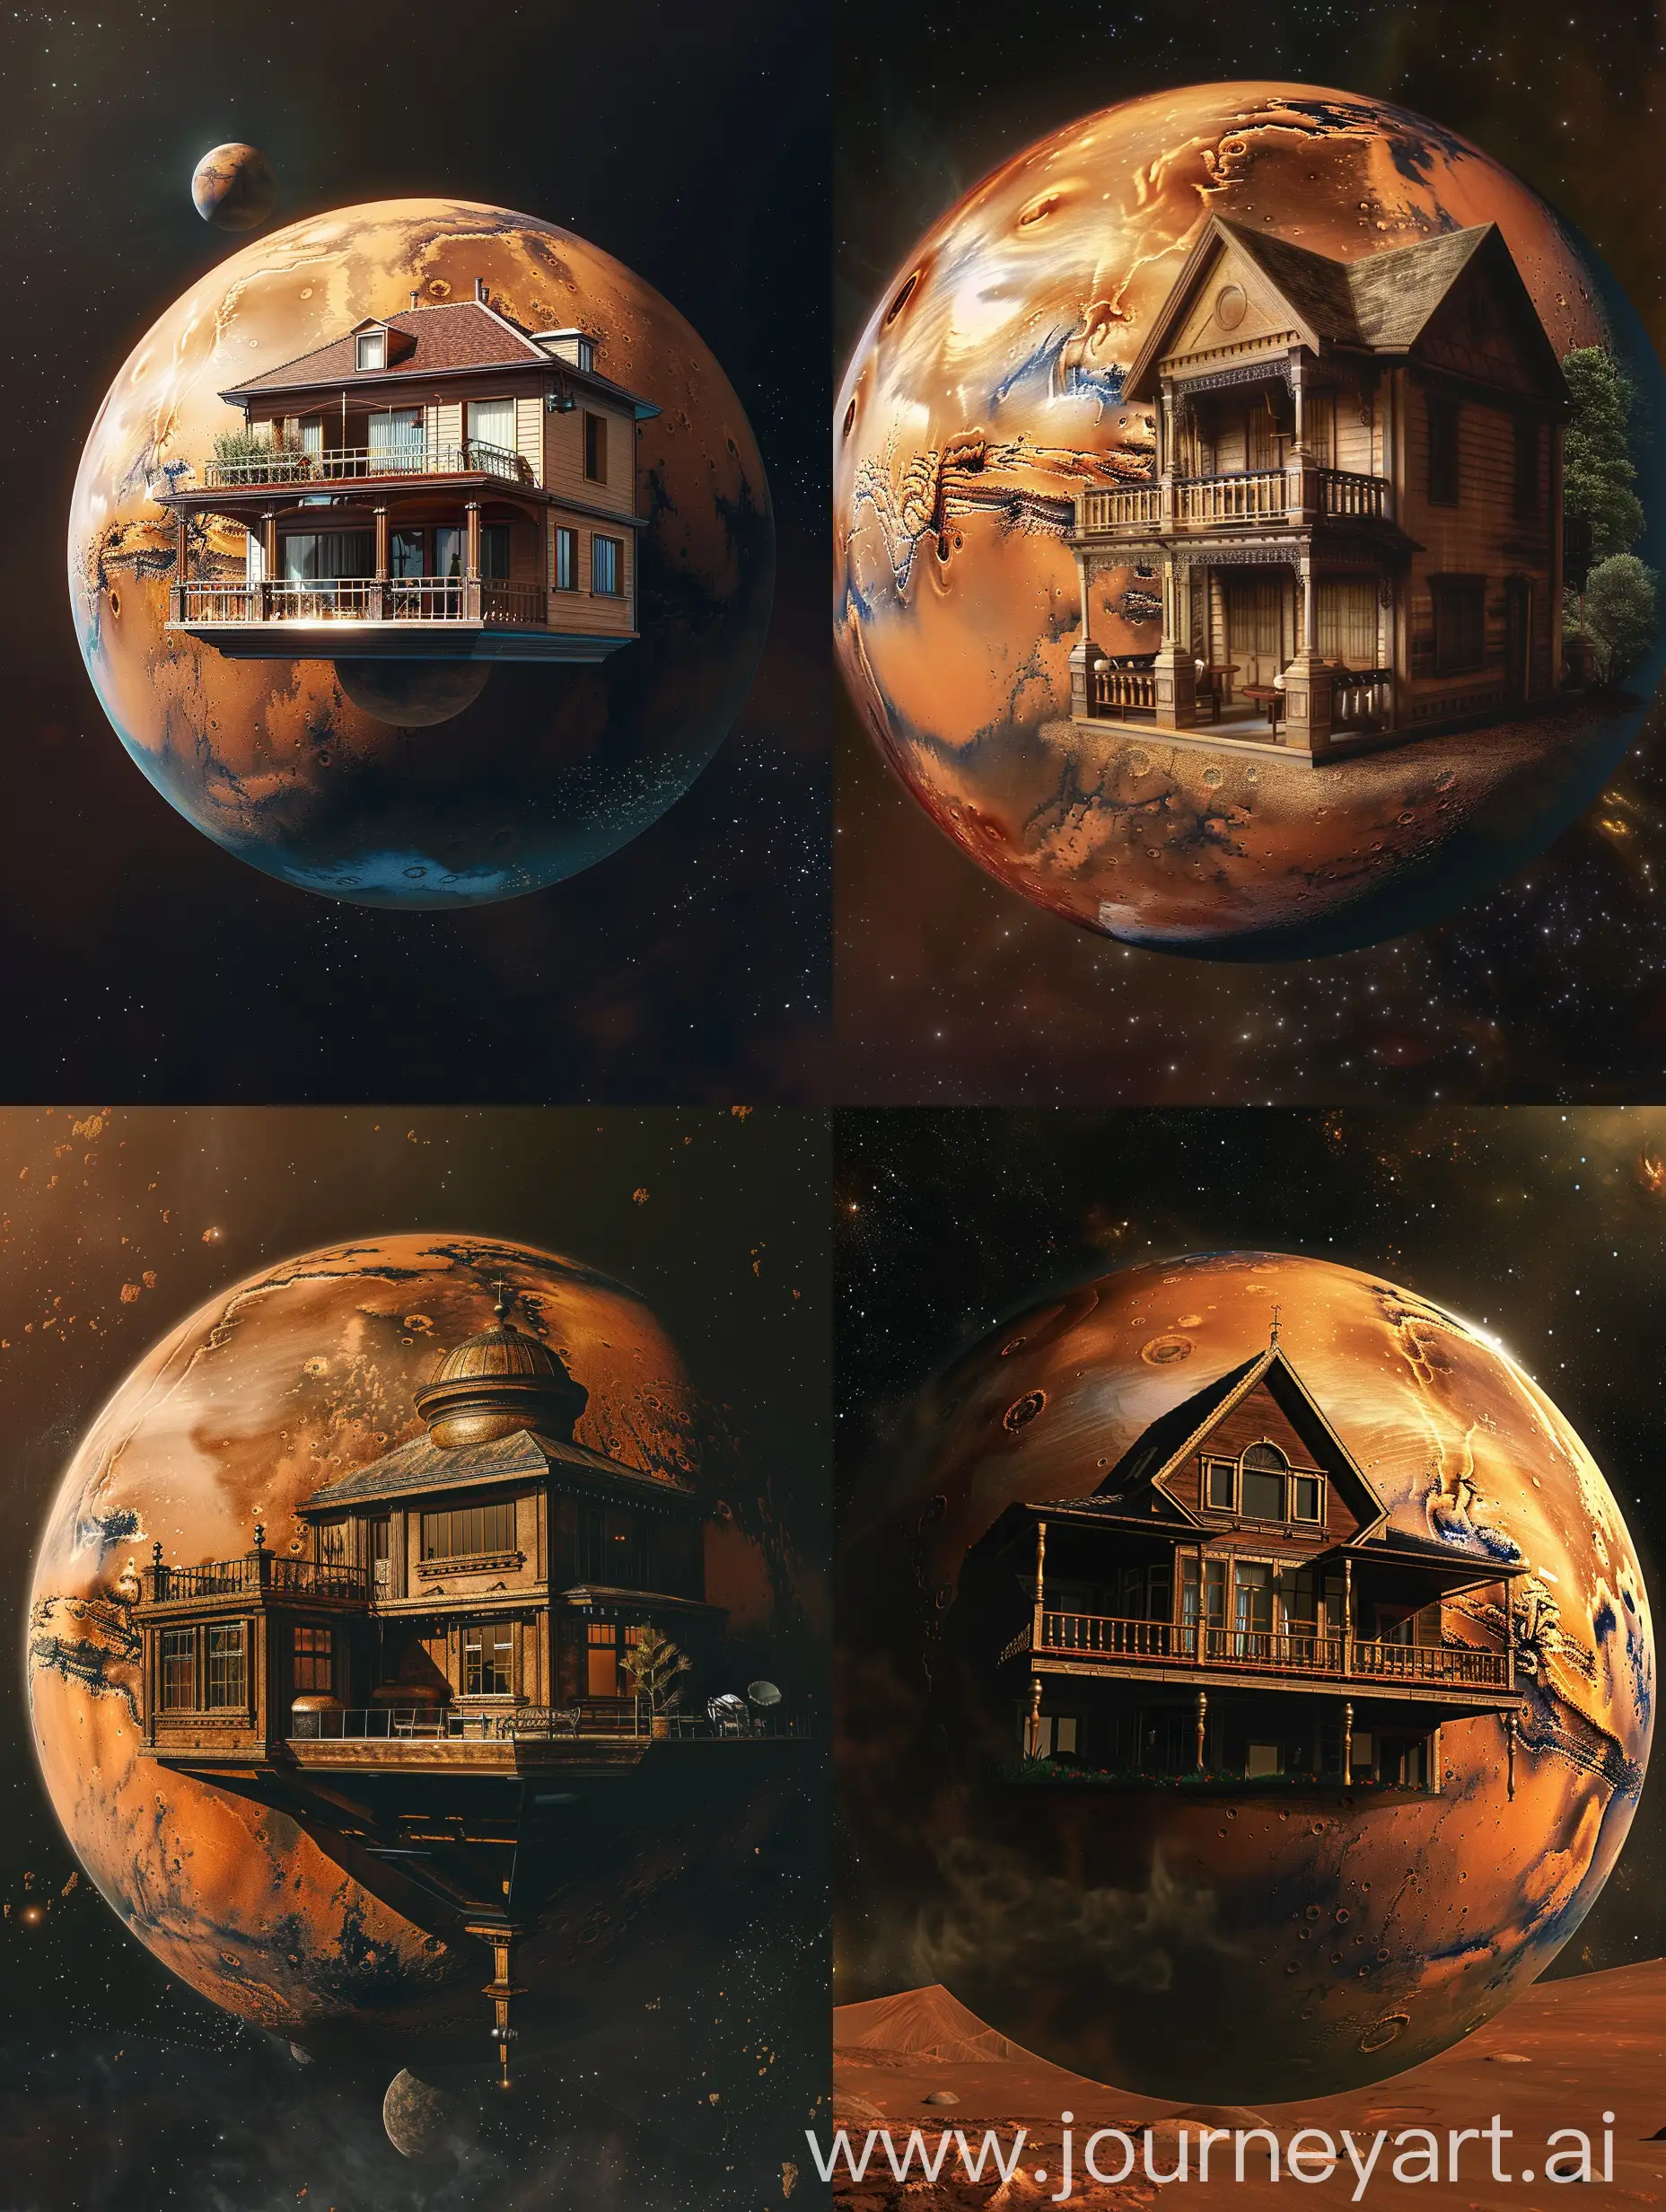 The sphere of the planet Mars in outer space, on the planet there is a two-story house with a balcony and a porch, high detail